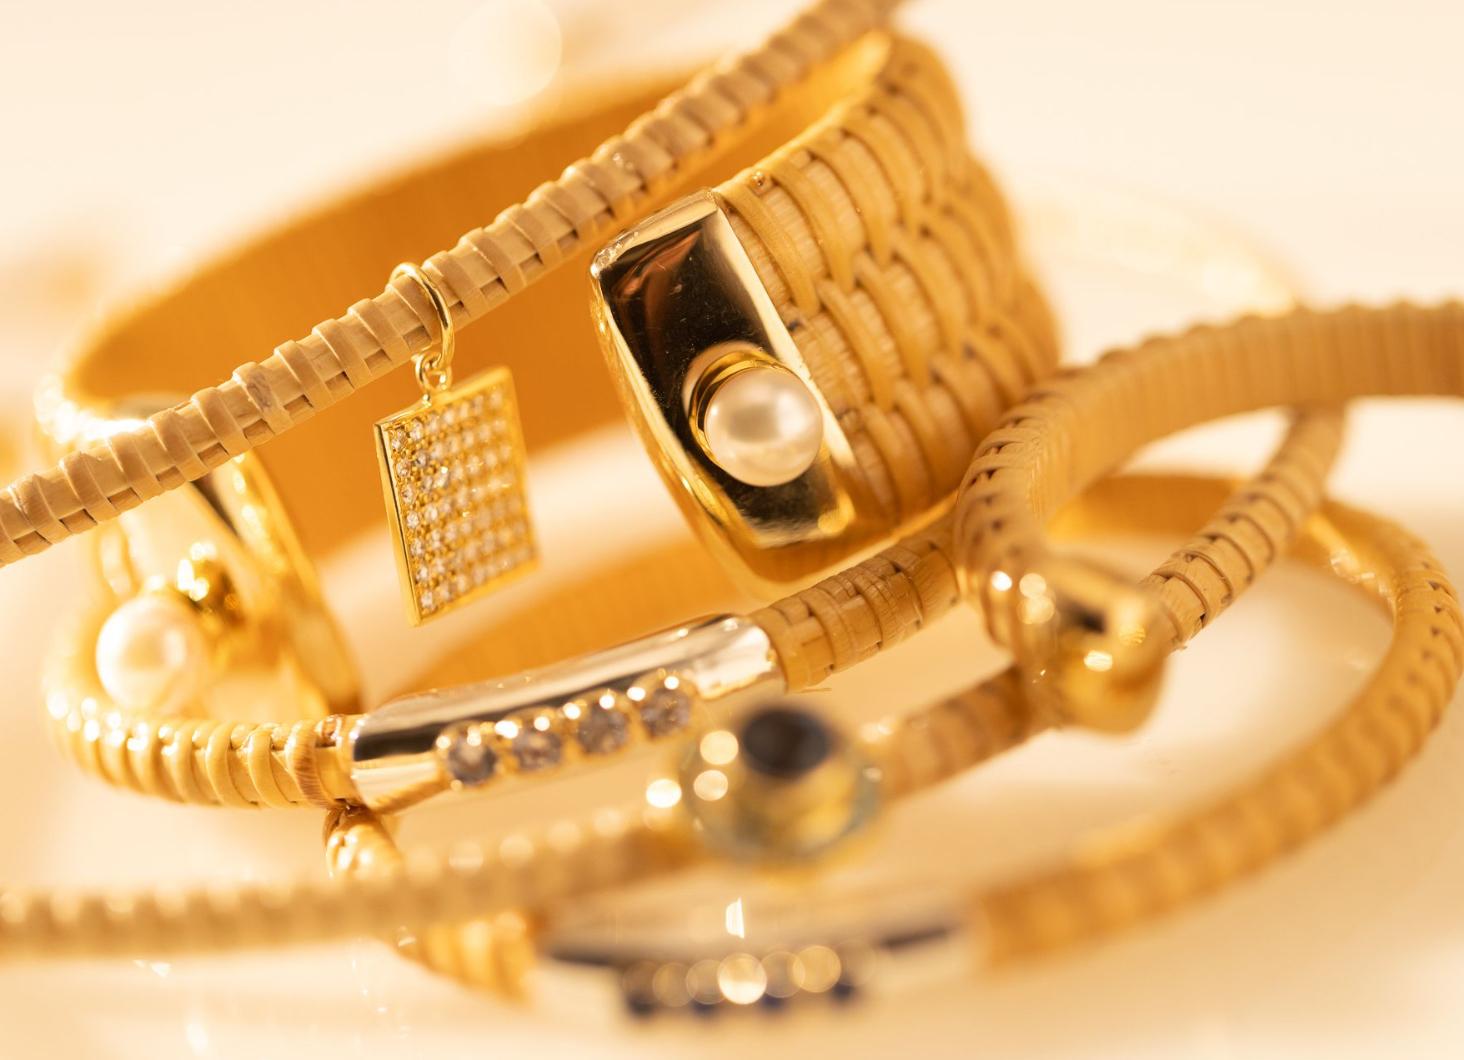 Nantucket Lightship jewelry is a tradition in New England. This handmade cuff celebrates the tradition with a modern esthetic by adding gold and Akoya pearls. Thick natural cain & rattan cuff with 10K yellow gold caps and 22K yellow gold pearl